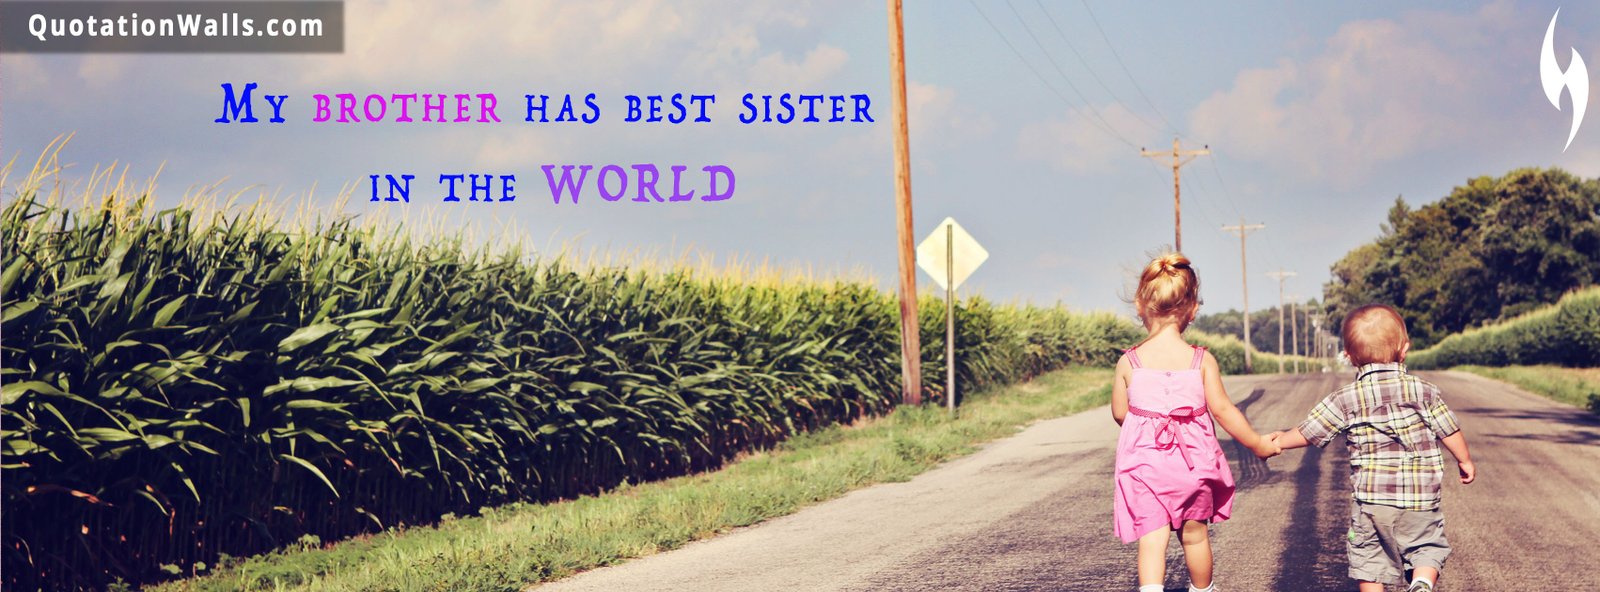 My Brother Has Best Sister Love Facebook Cover Photo - QuotationWalls